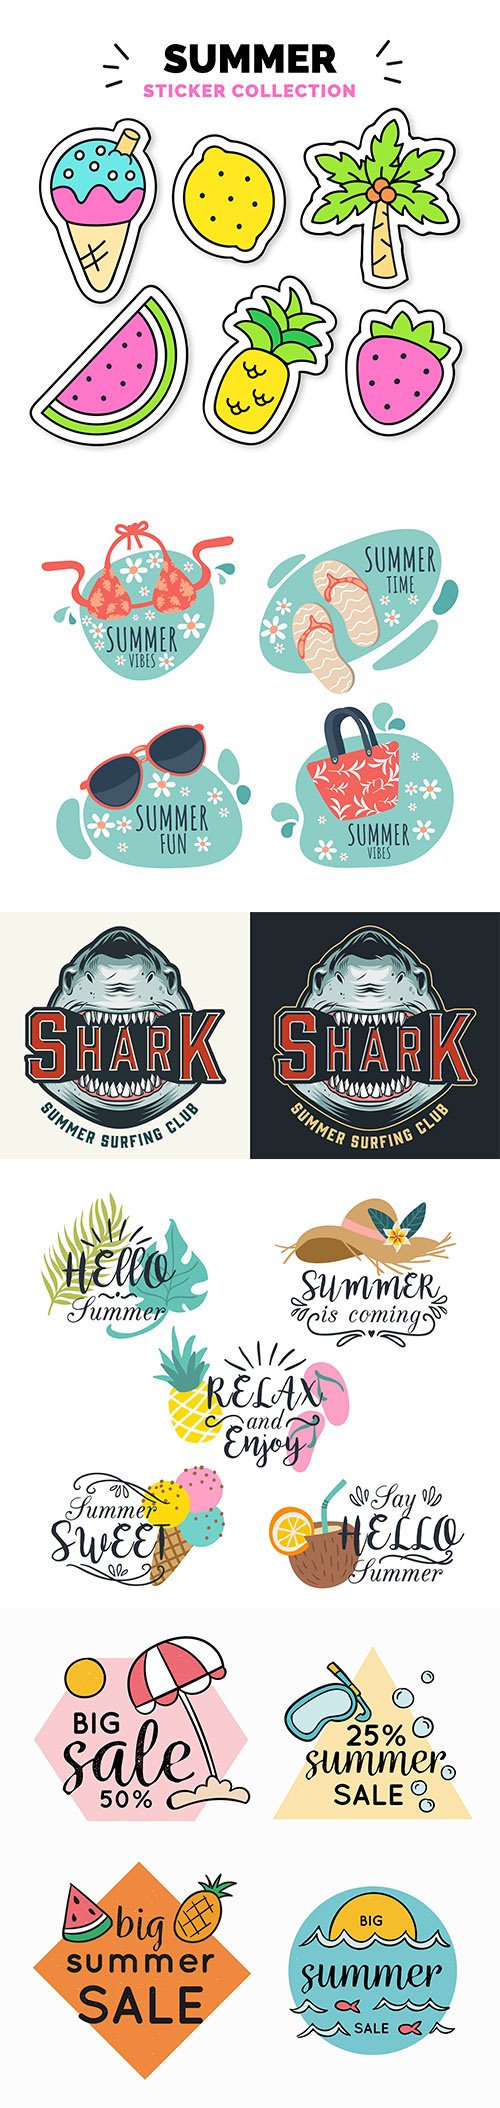 Colorful hand-drawn summer badge collection and surfing club logo